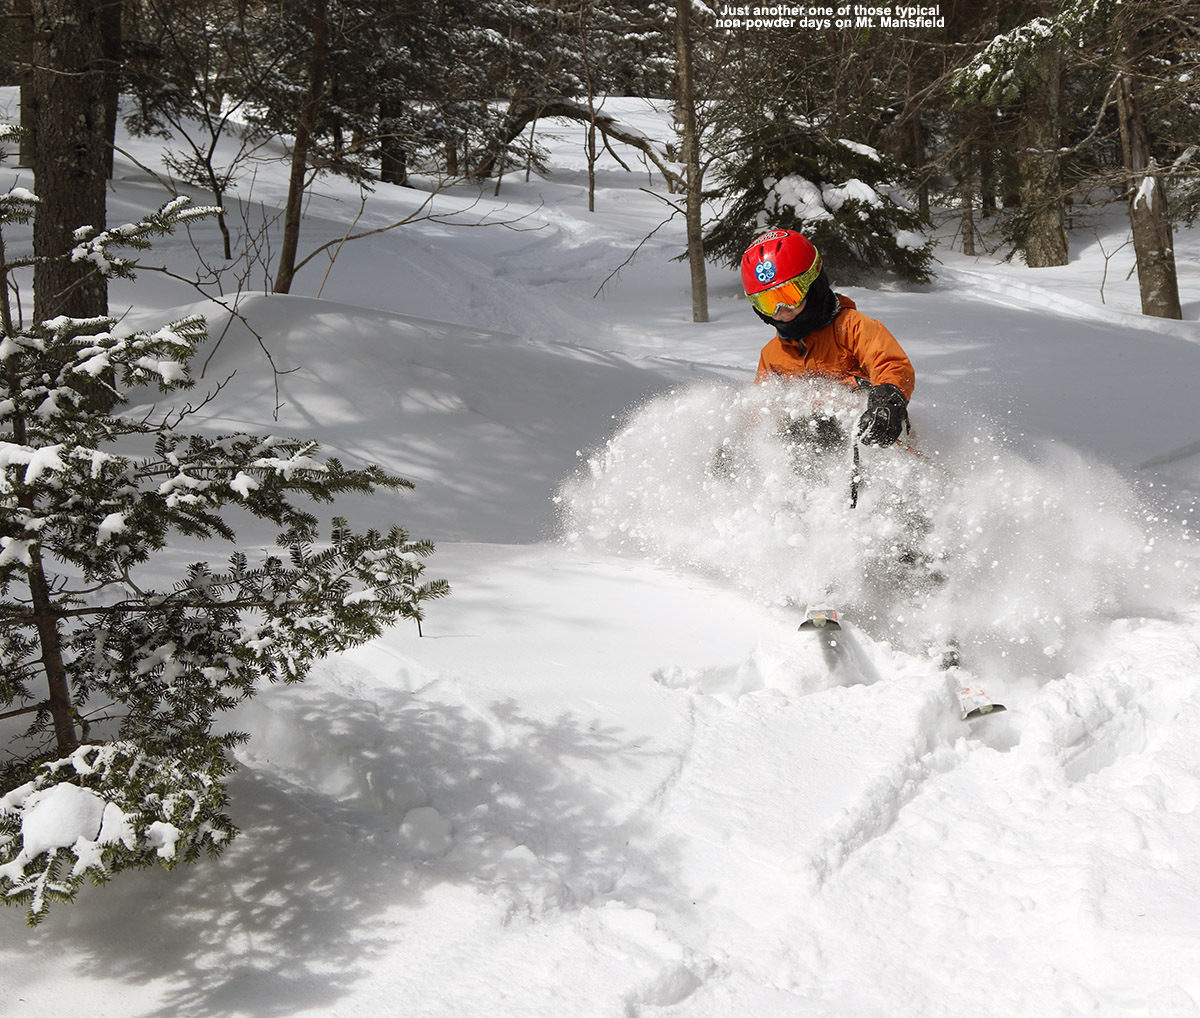 An image of Dylan skiing powder snow out near the Angel Food area of Stowe Mountain Resort in Vermont